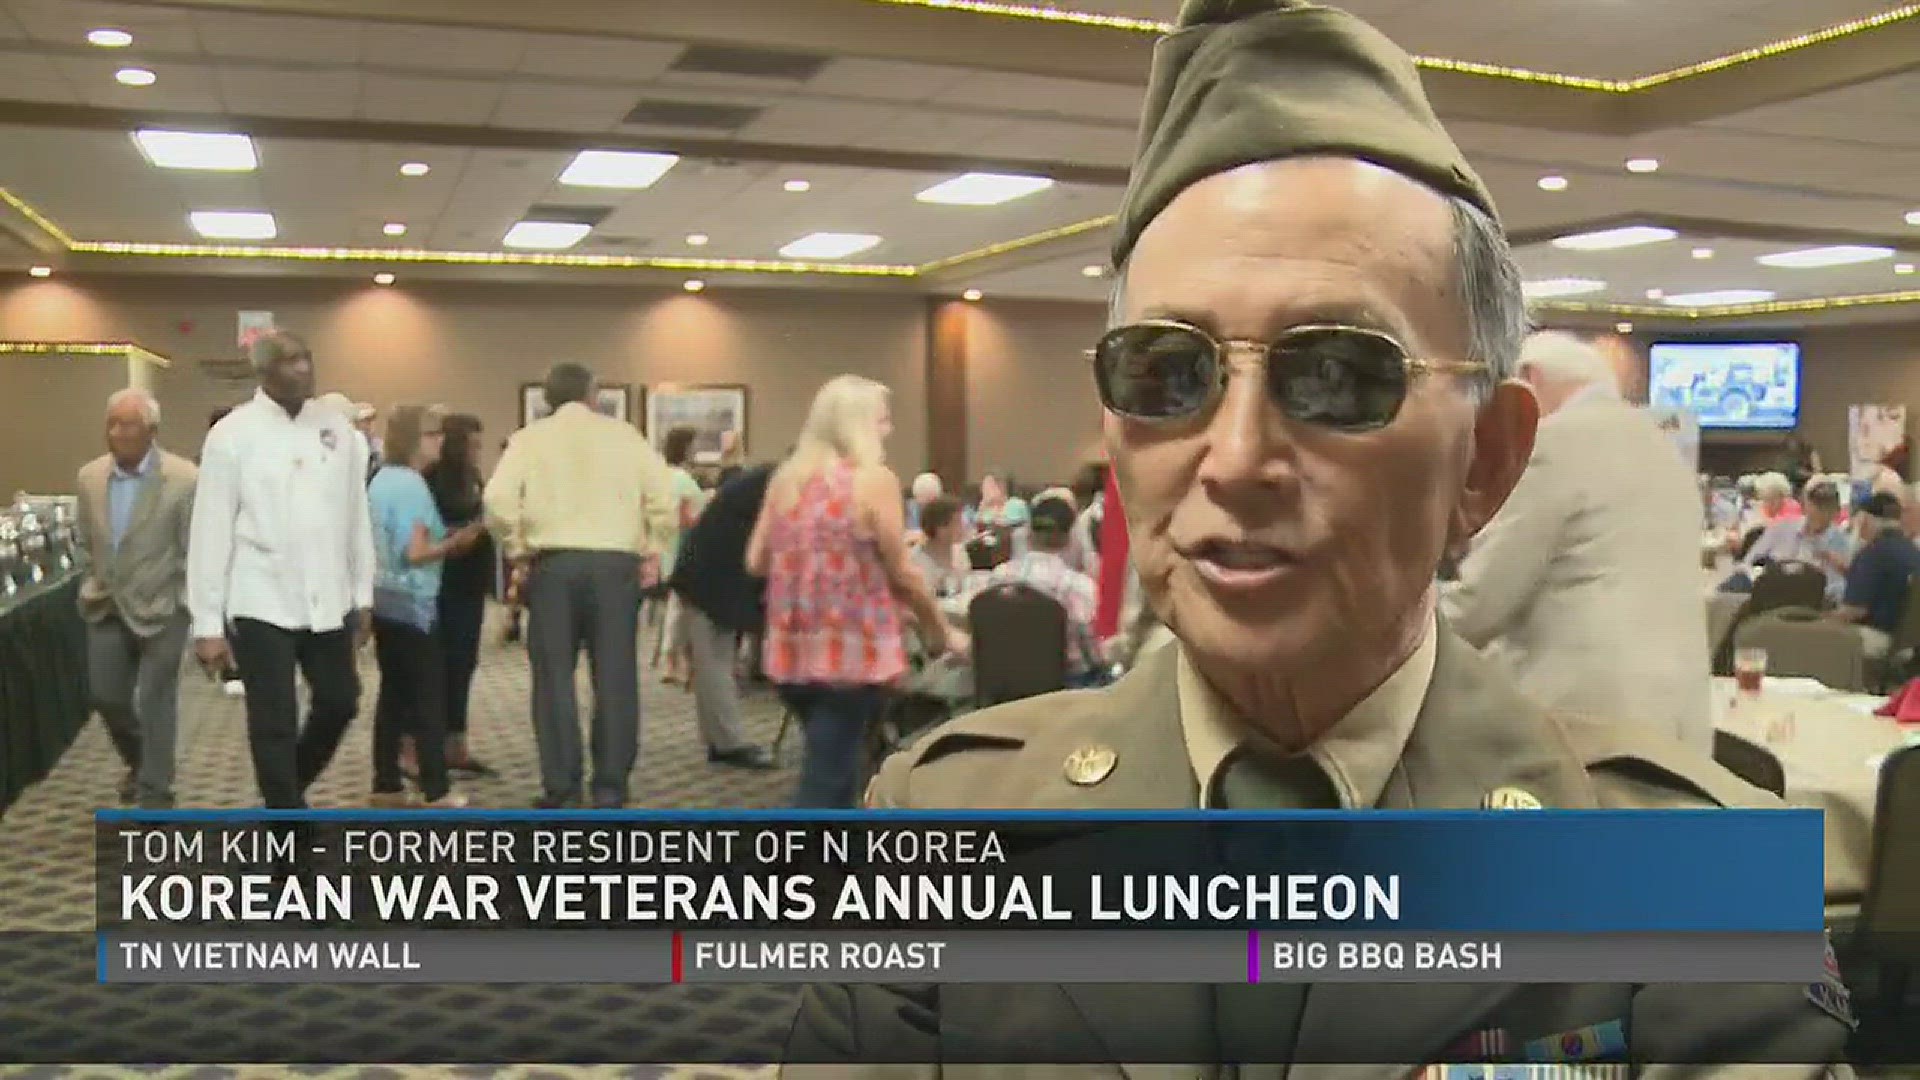 Korean War veterans meet for their annual luncheon on the same day a missing veteran of the war was laid to rest.